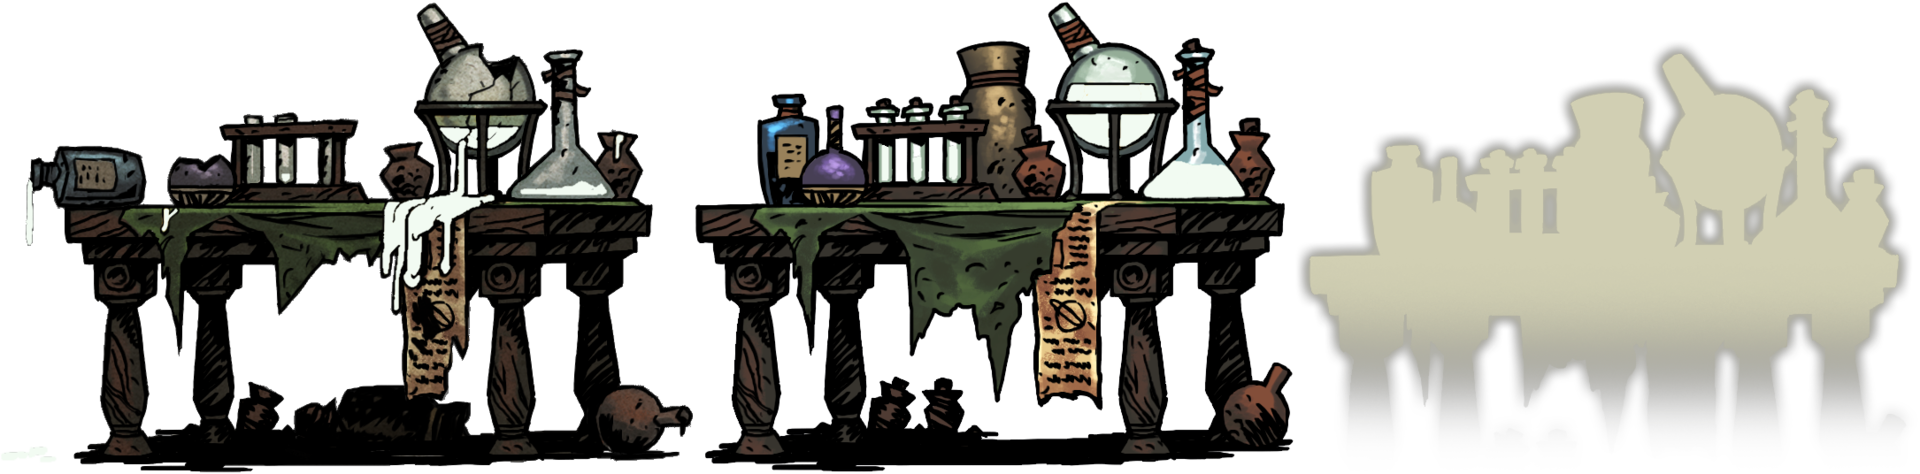 alchemy_table.thumb.png.8aa37d05f1f860a86ea9bc68bd7fe8a7.png